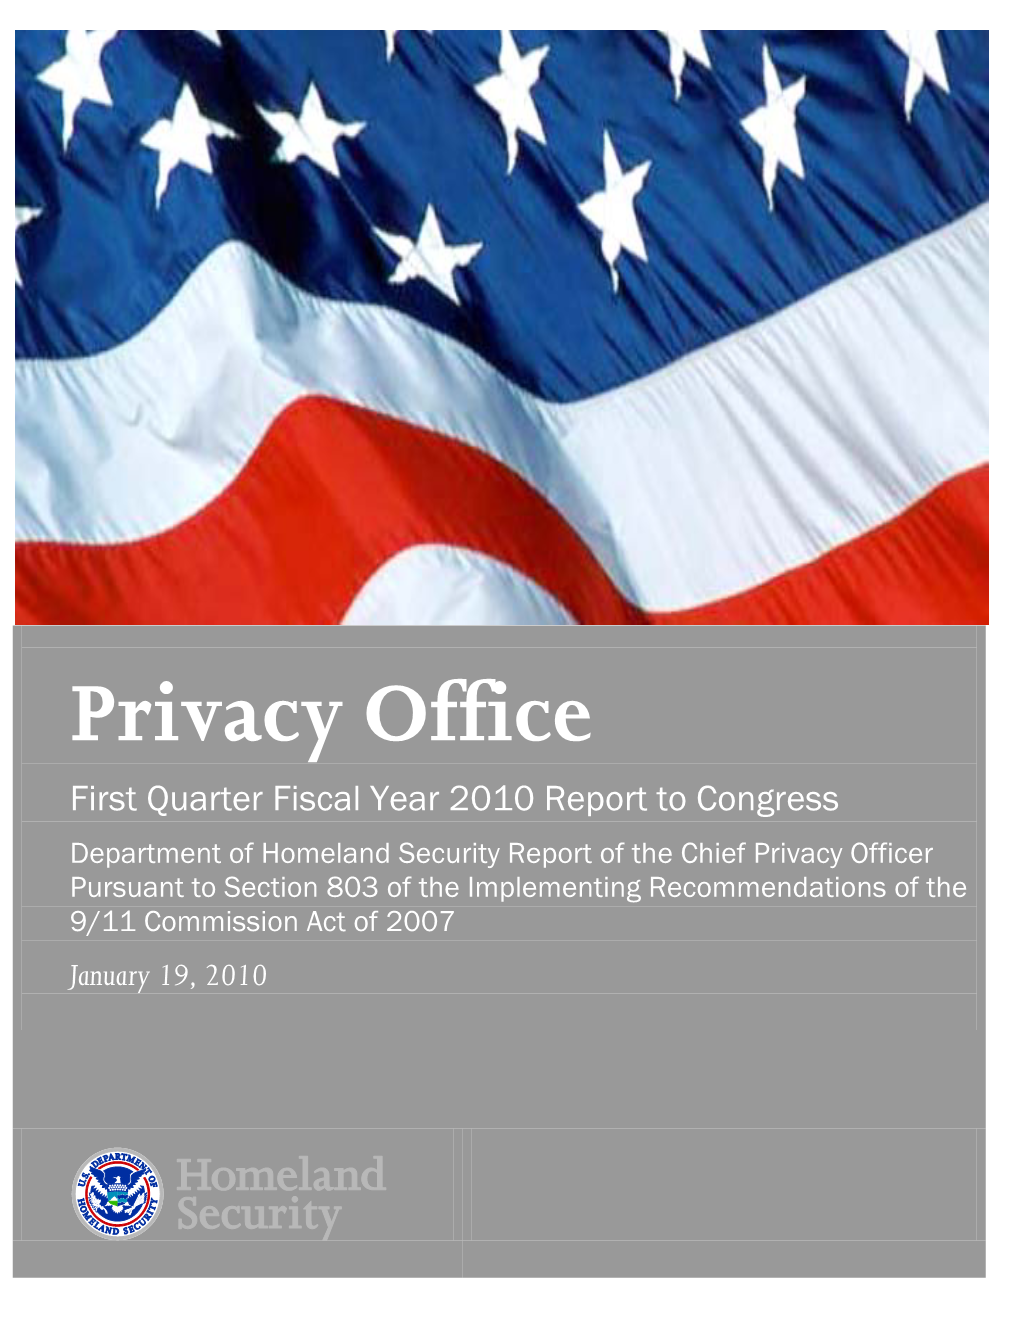 First Quarter FY 2010 Section 803 Report to Congress